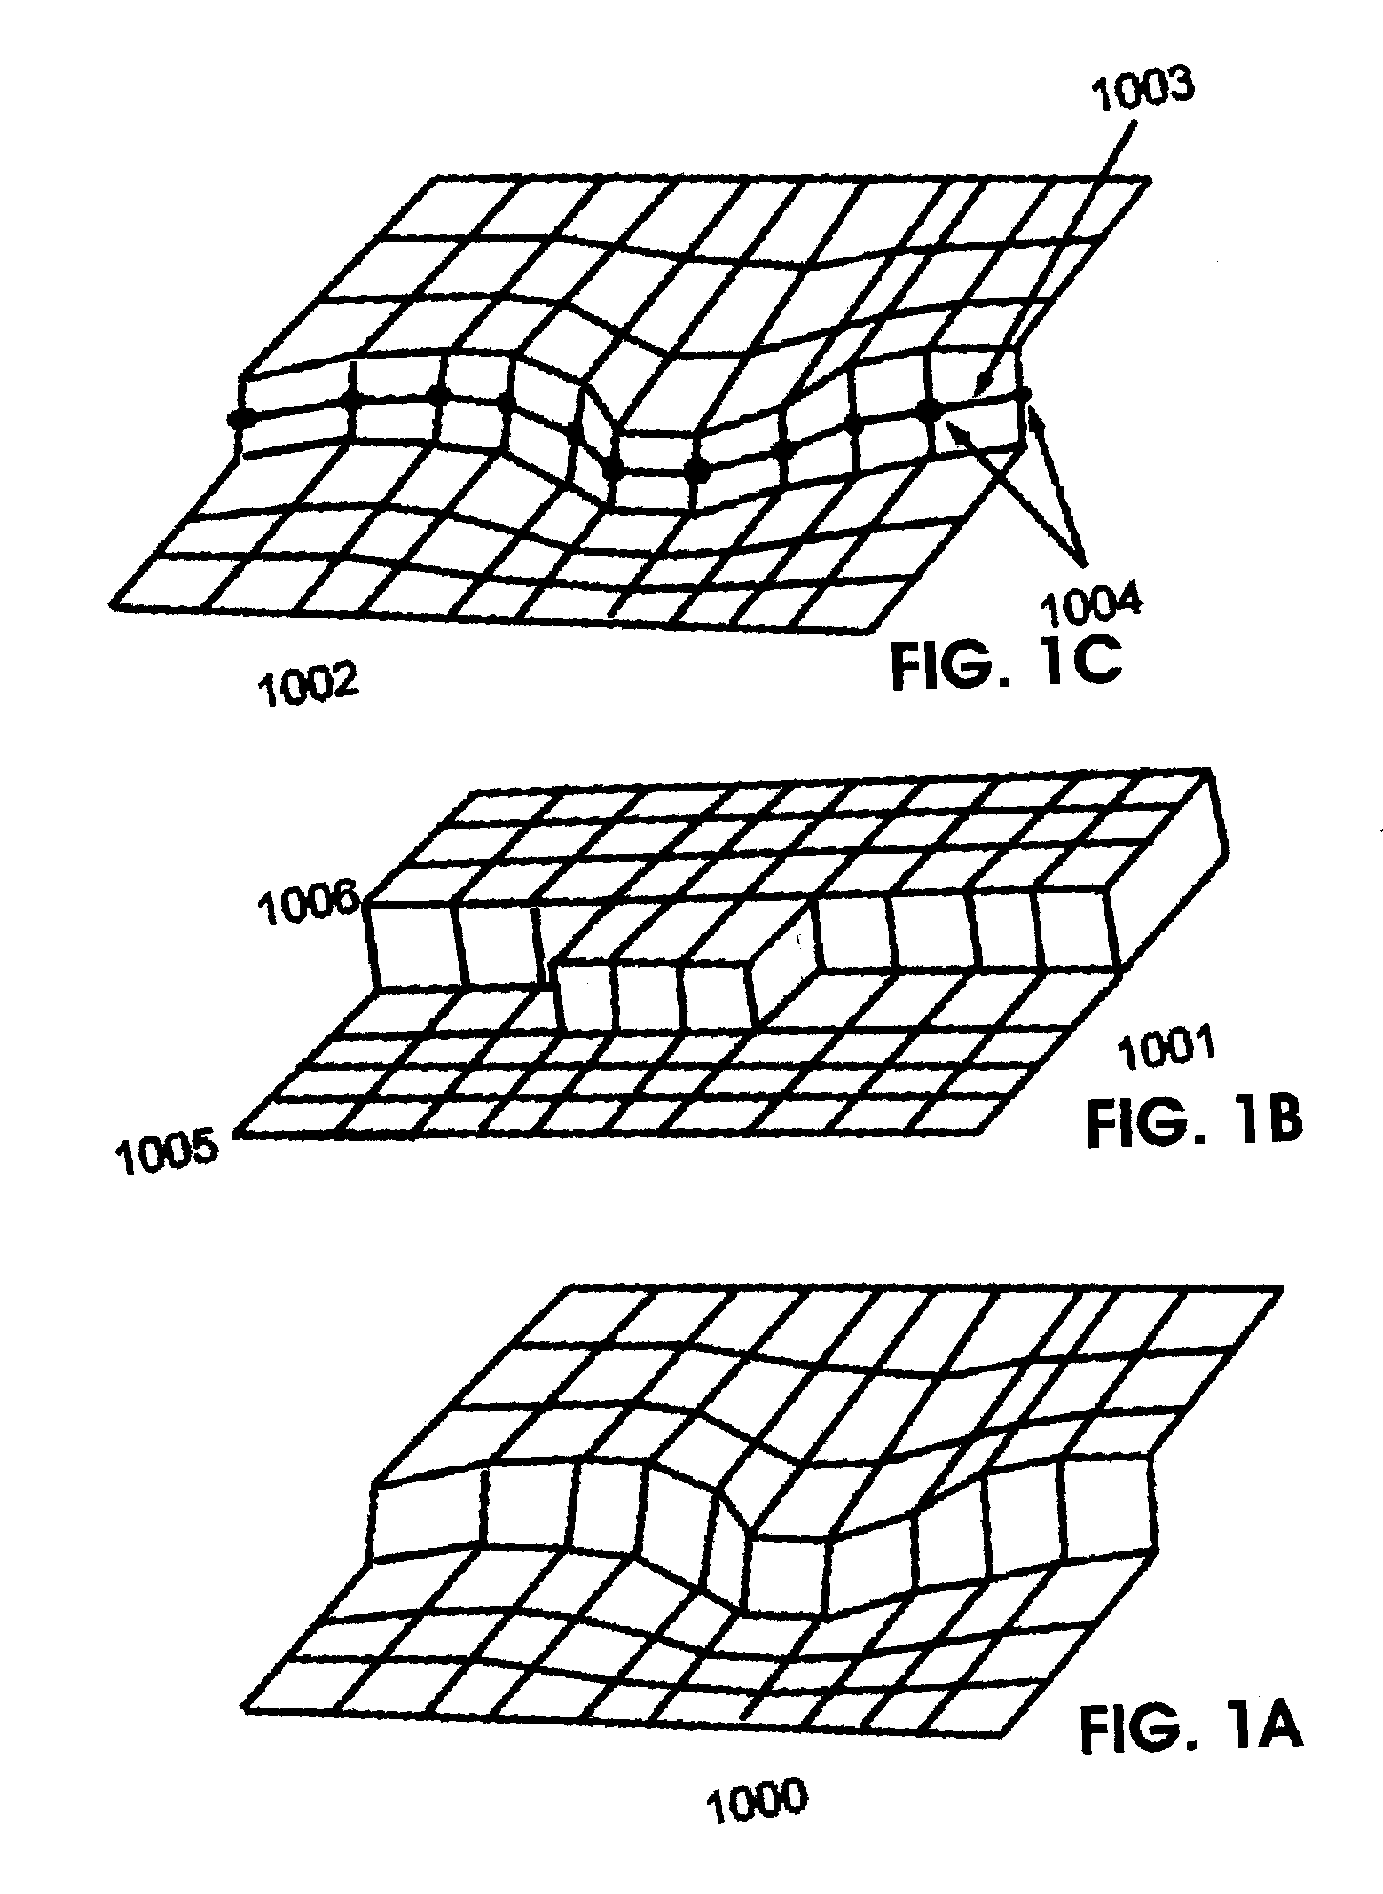 Method and apparatus for determining
offsets of a part from a digital image